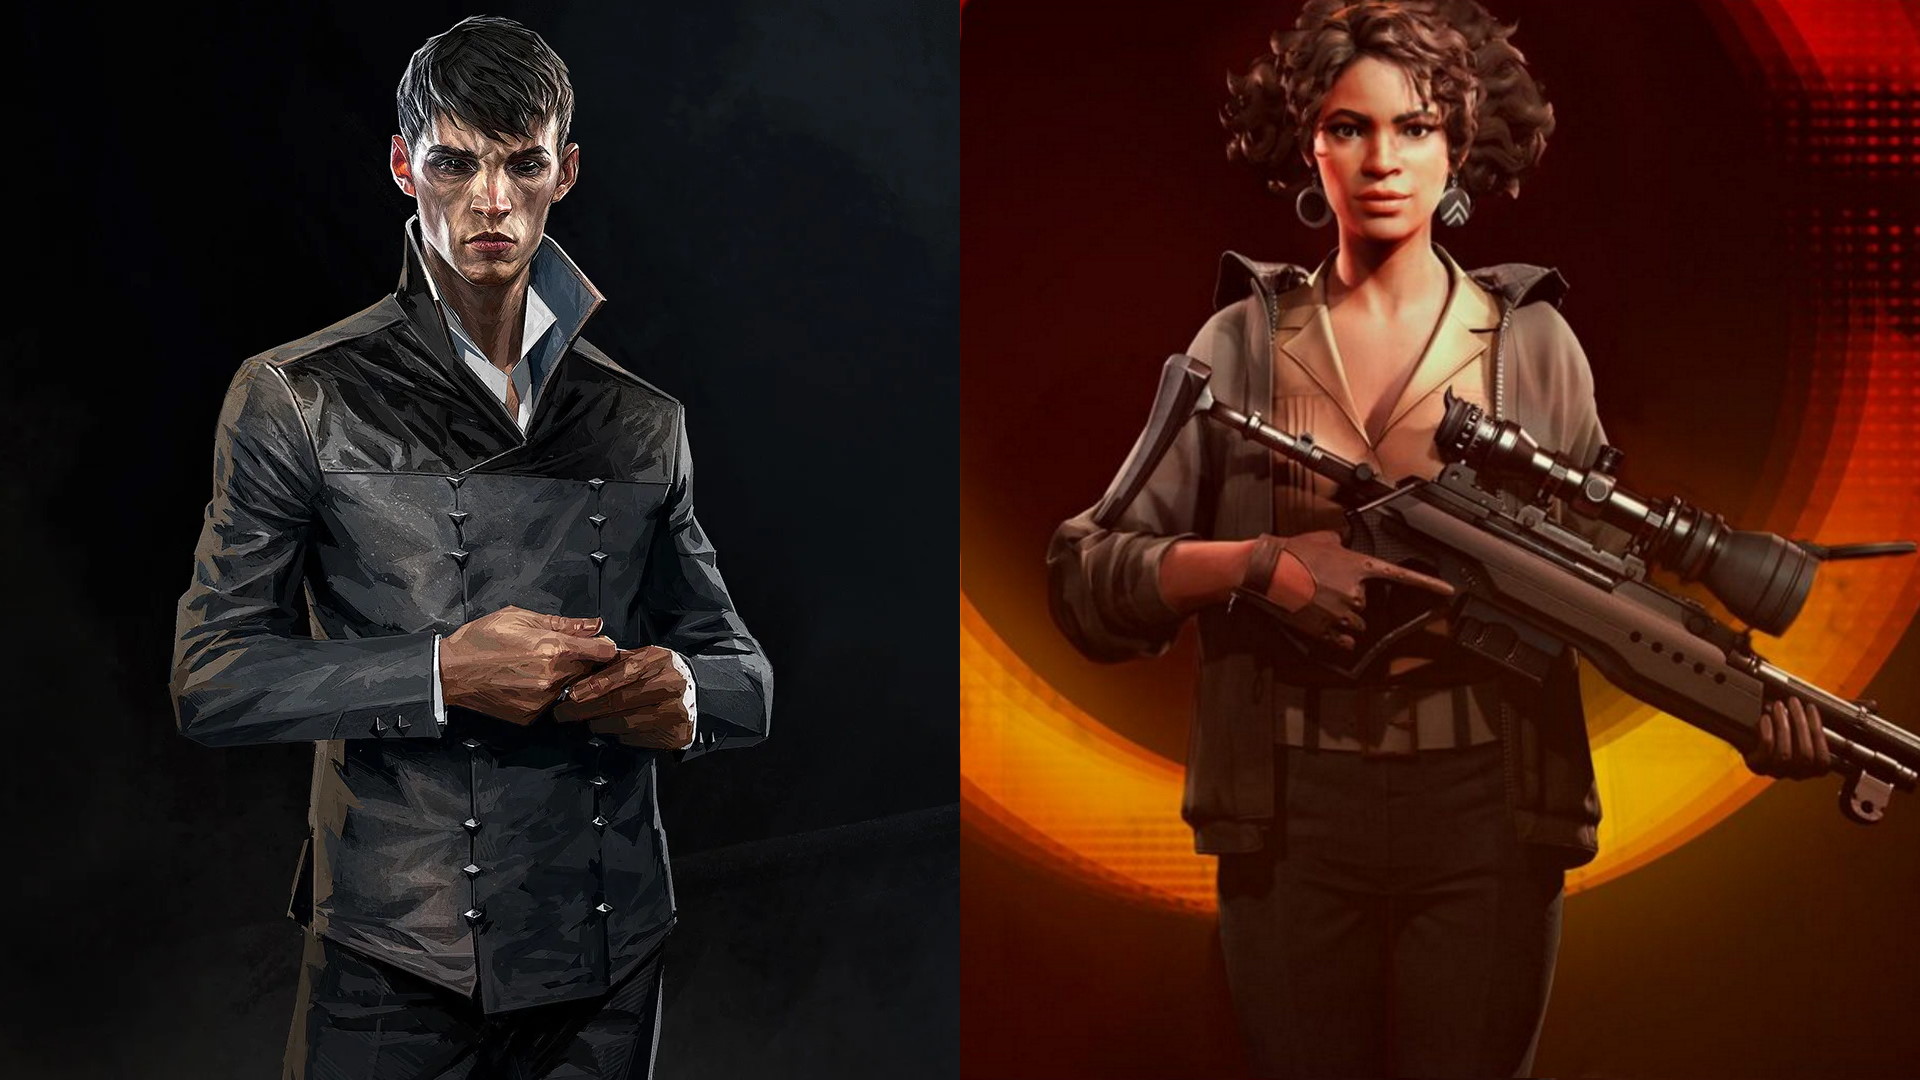 Deathloop will need to be a masterpiece to top Dishonored 2